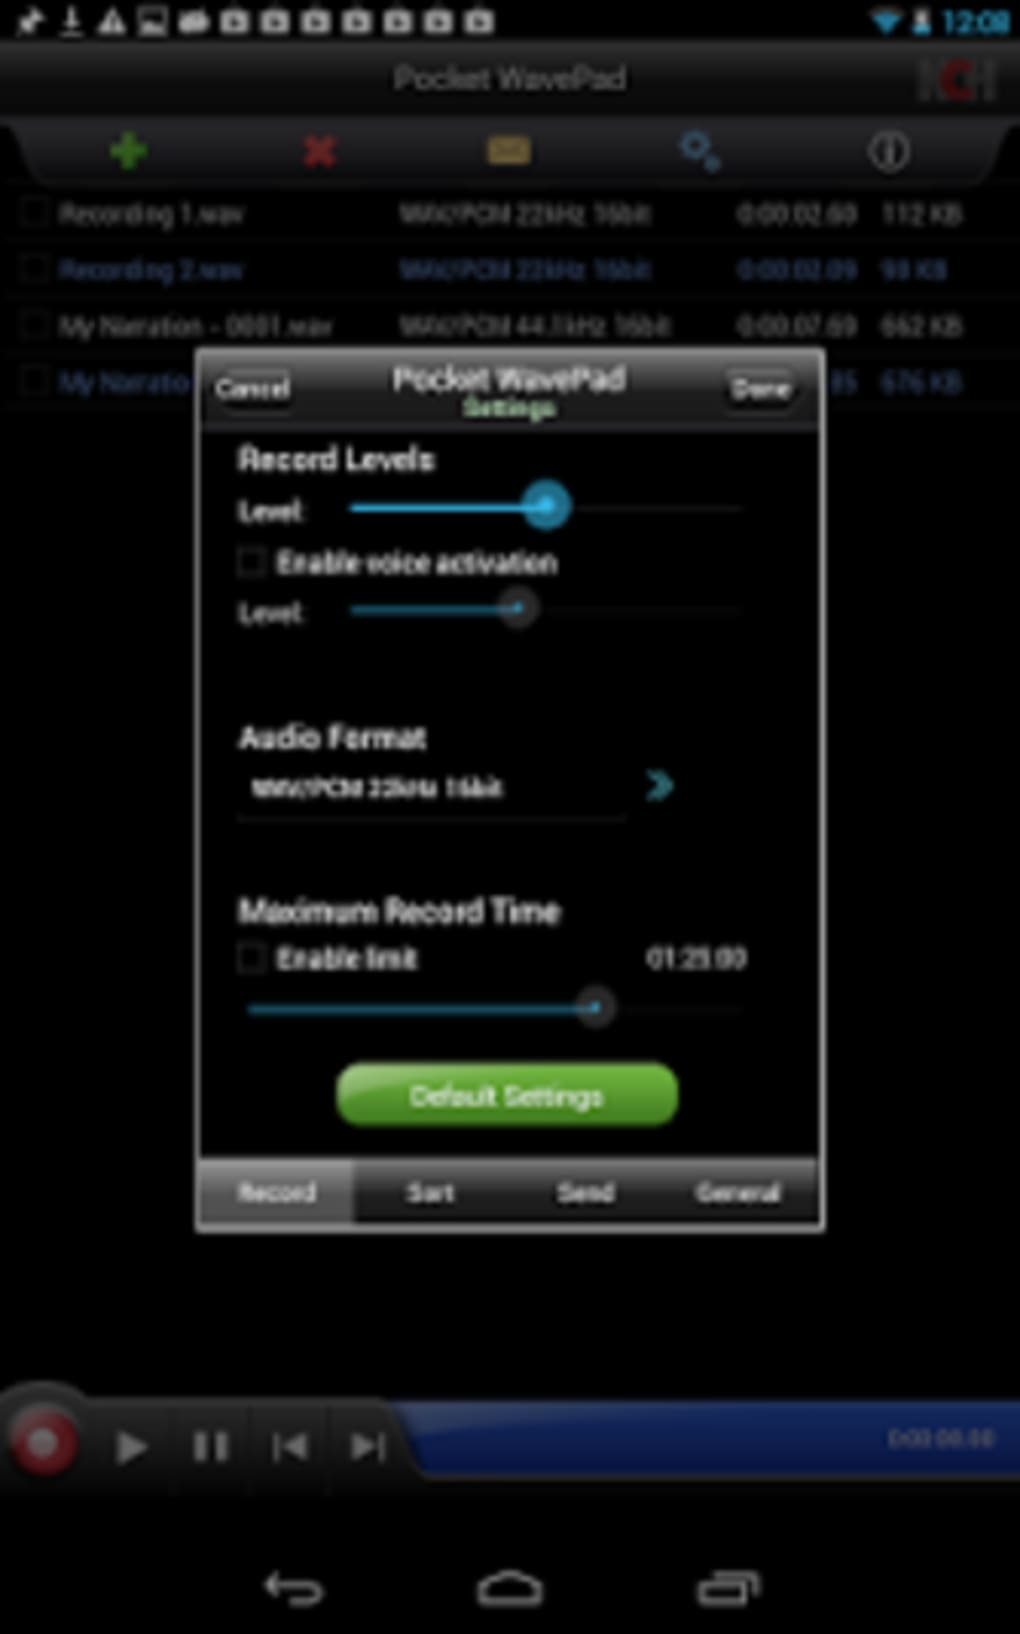 wavepad for android free download